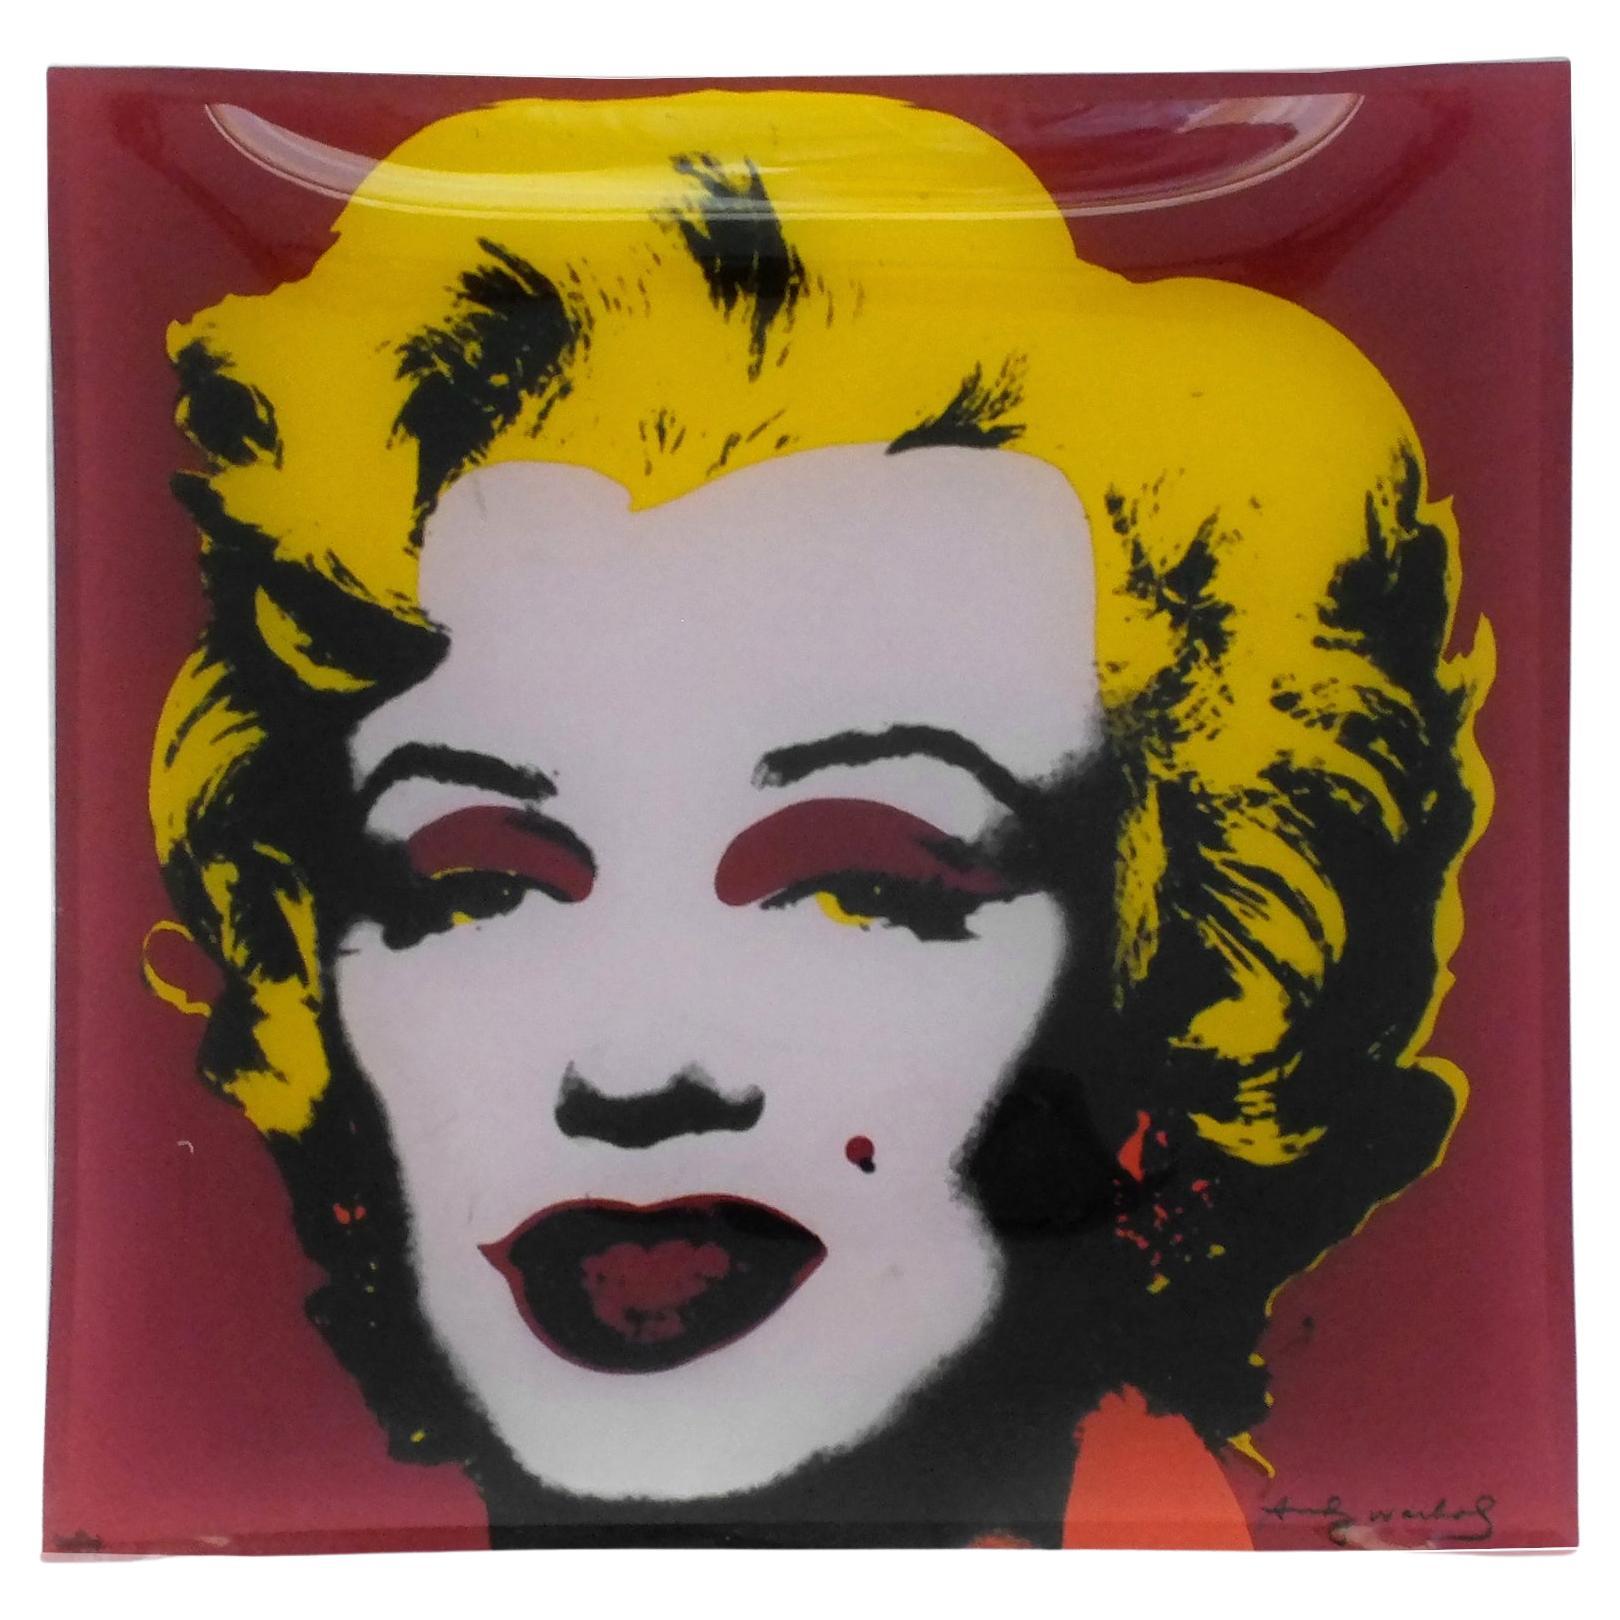 Vintage Glass Square Plate Rosenthal Marilyn Monroe Celebrity Series Andy Warhol For Sale